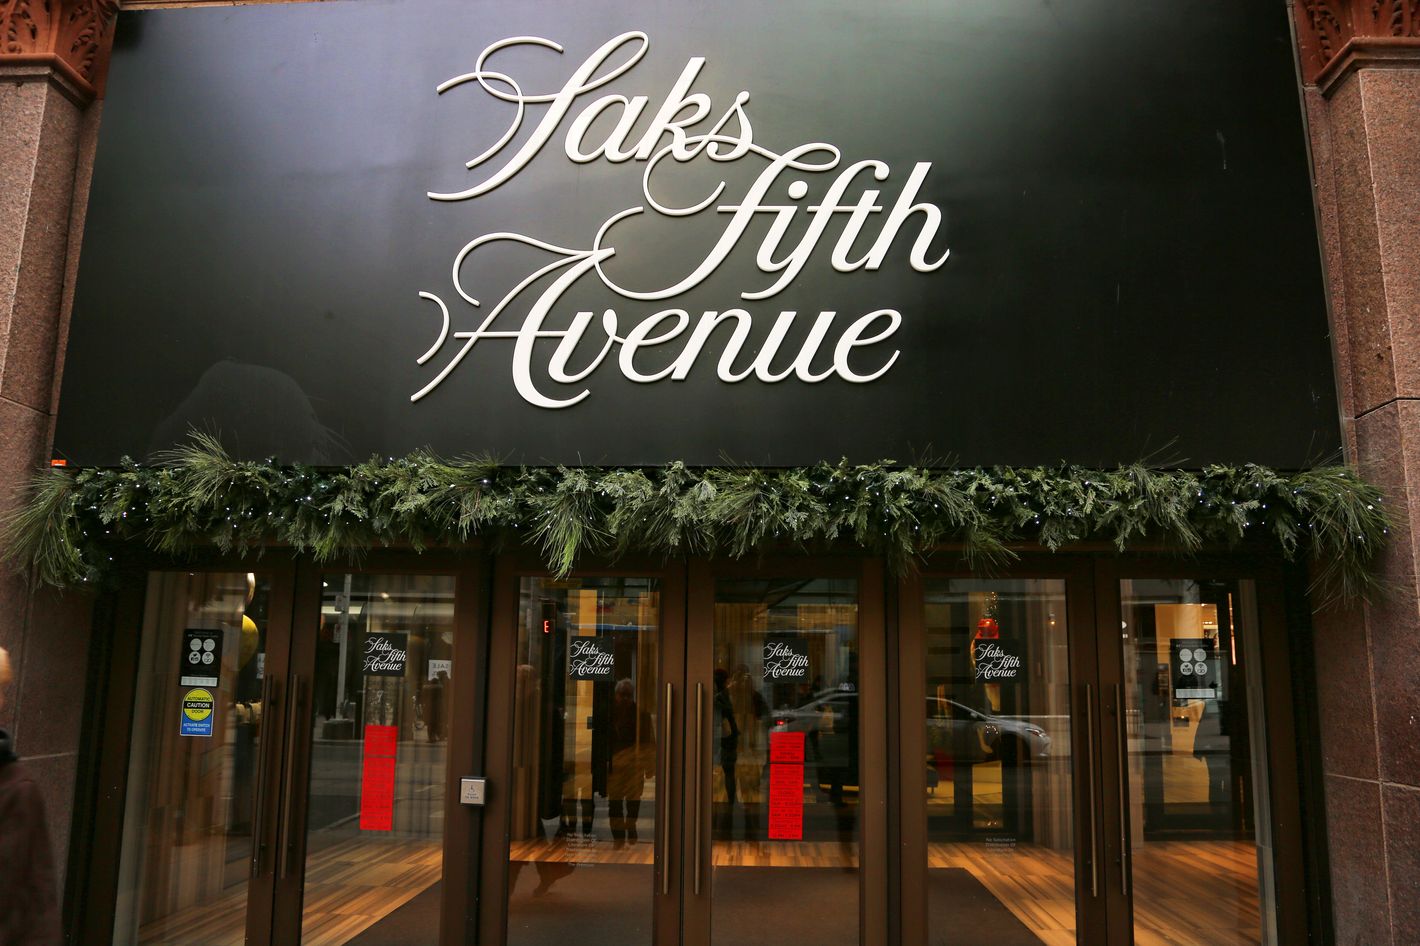 Saks Fifth Avenue Unveils New Beauty Floor In New York Flagship